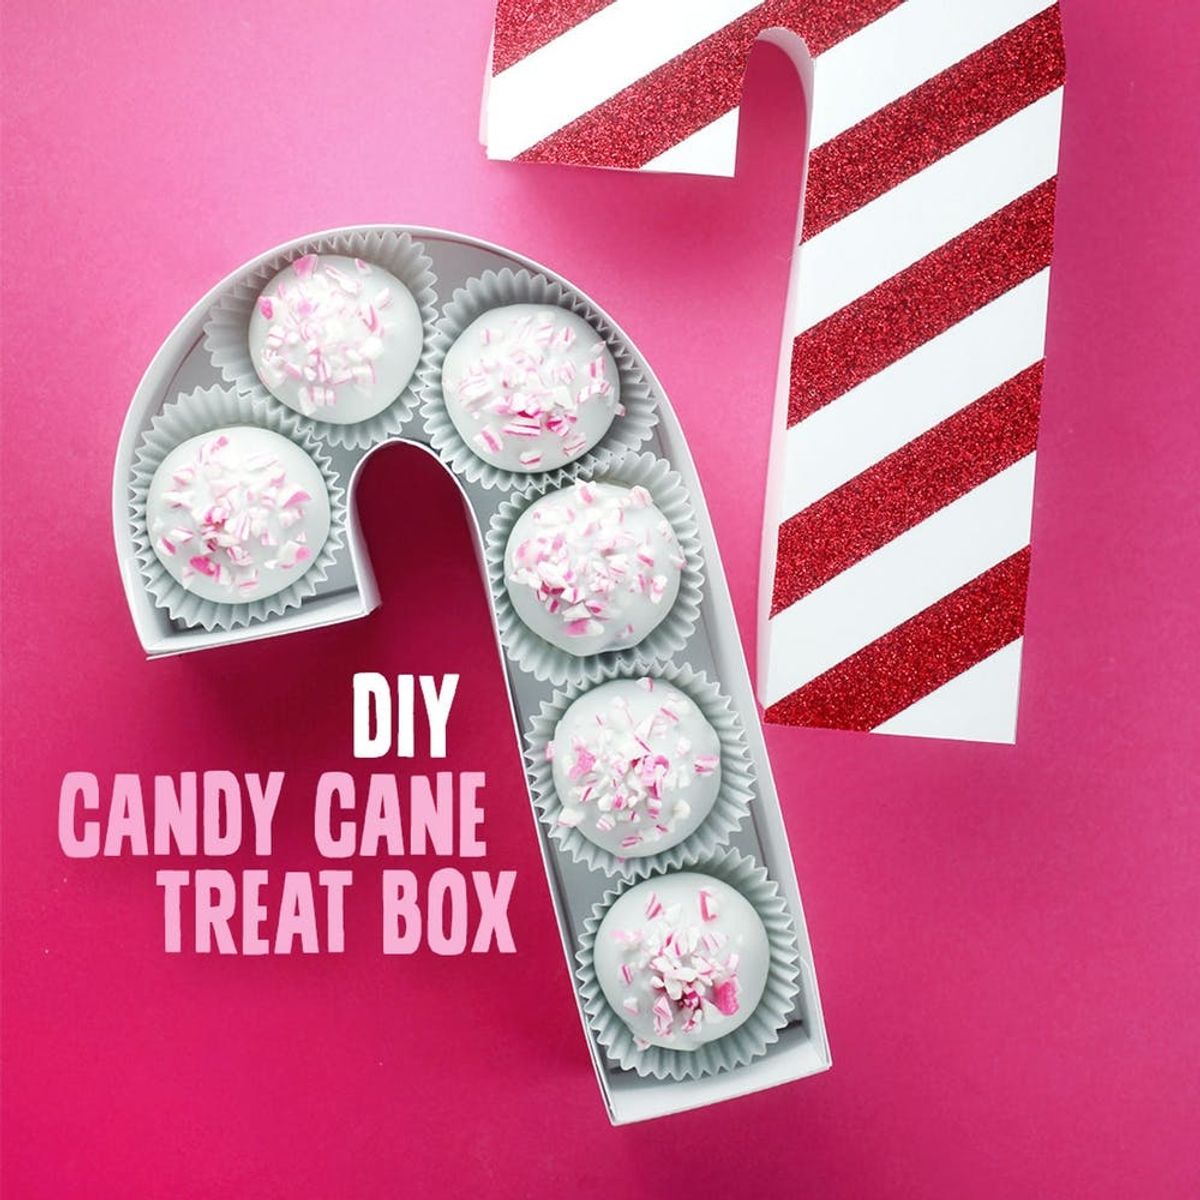 Make This DIY Candy Cane Treat Box for Sweet Treat Gifting